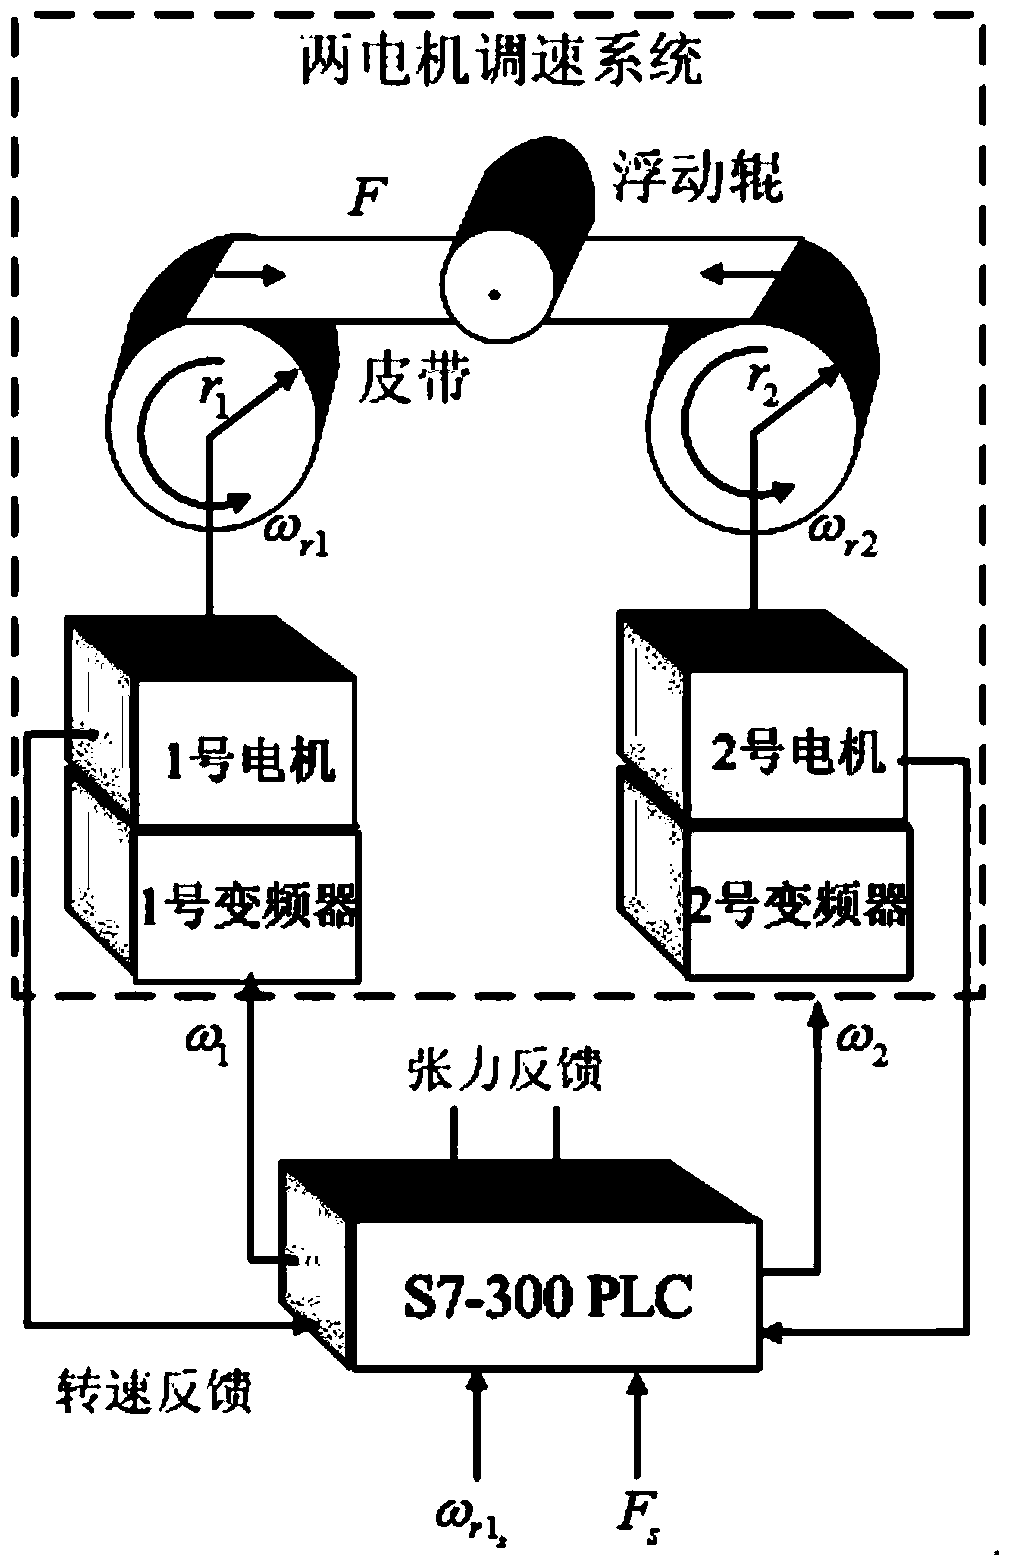 A sensorless tension identification method for a two-motor speed control system